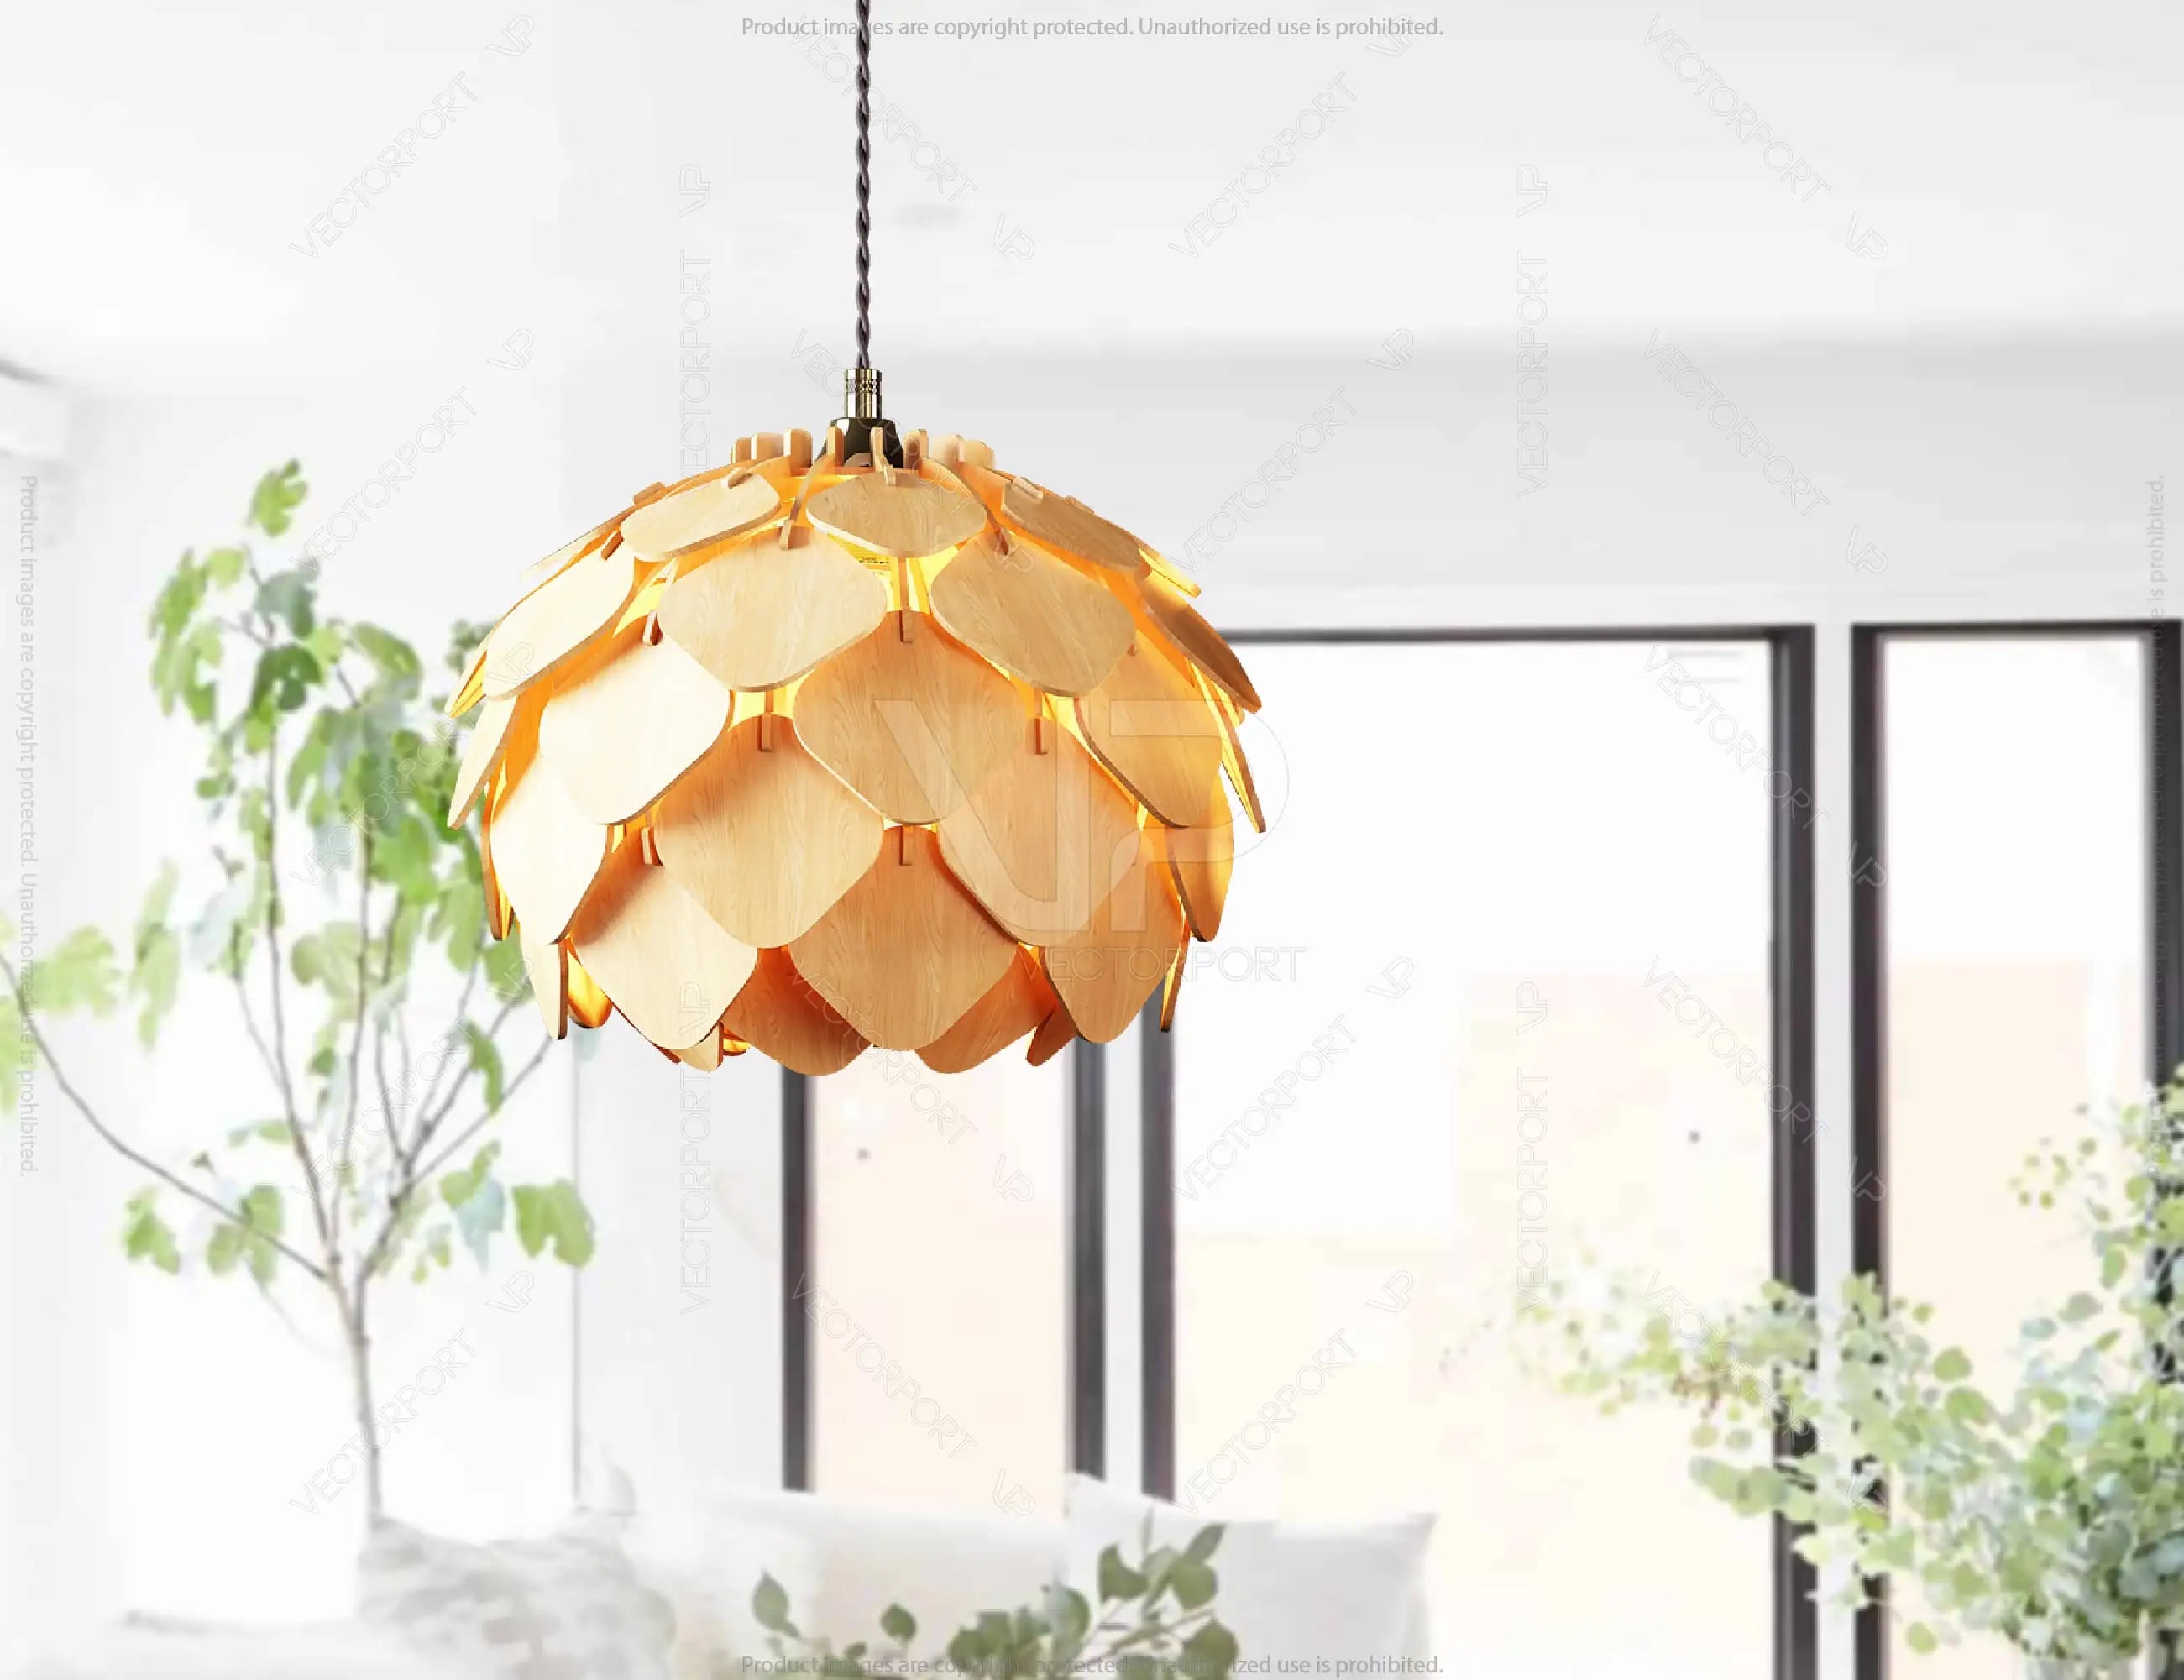 Scandinavian Pine Cone Hanging wooden chandelier lamp shade Pendant light template svg laser cut plywood| SVG, DXF, AI |#097|